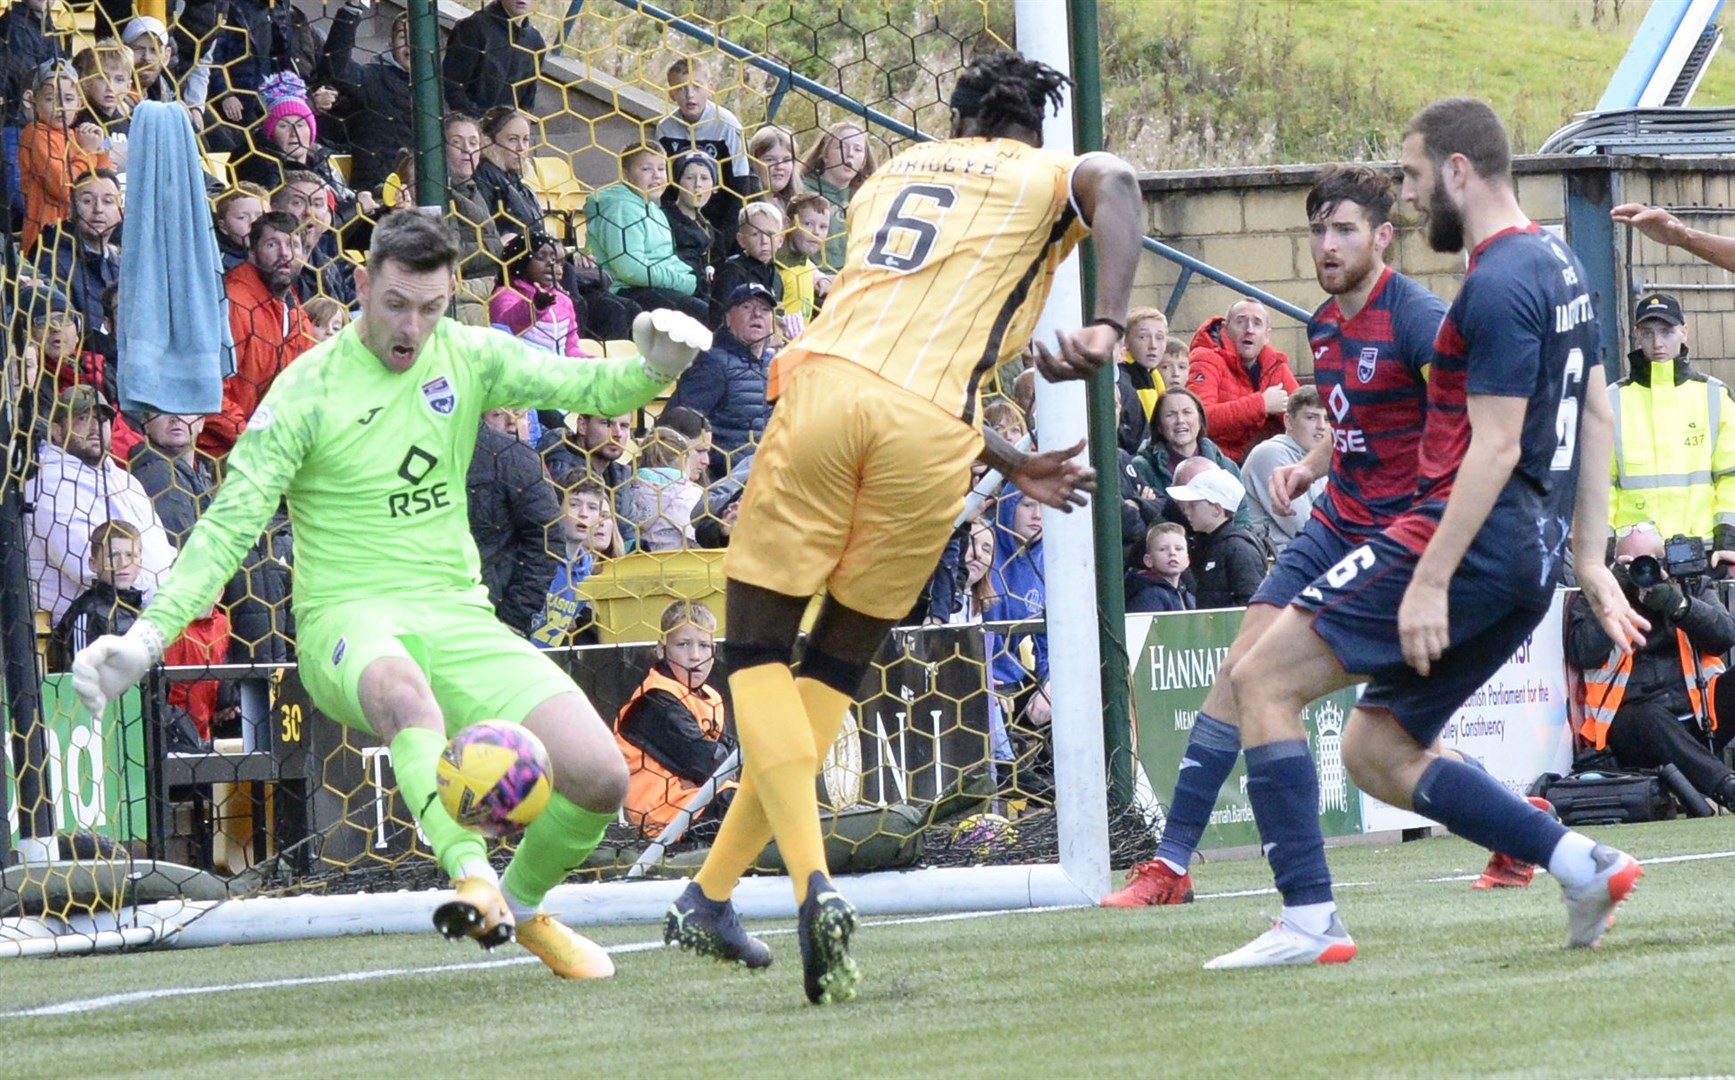 A super save from Ross County 'keeper Ross Laidlaw as he blocks a goal-bound shot from Livingston's Ayo Obileye. Picture: Callan Media